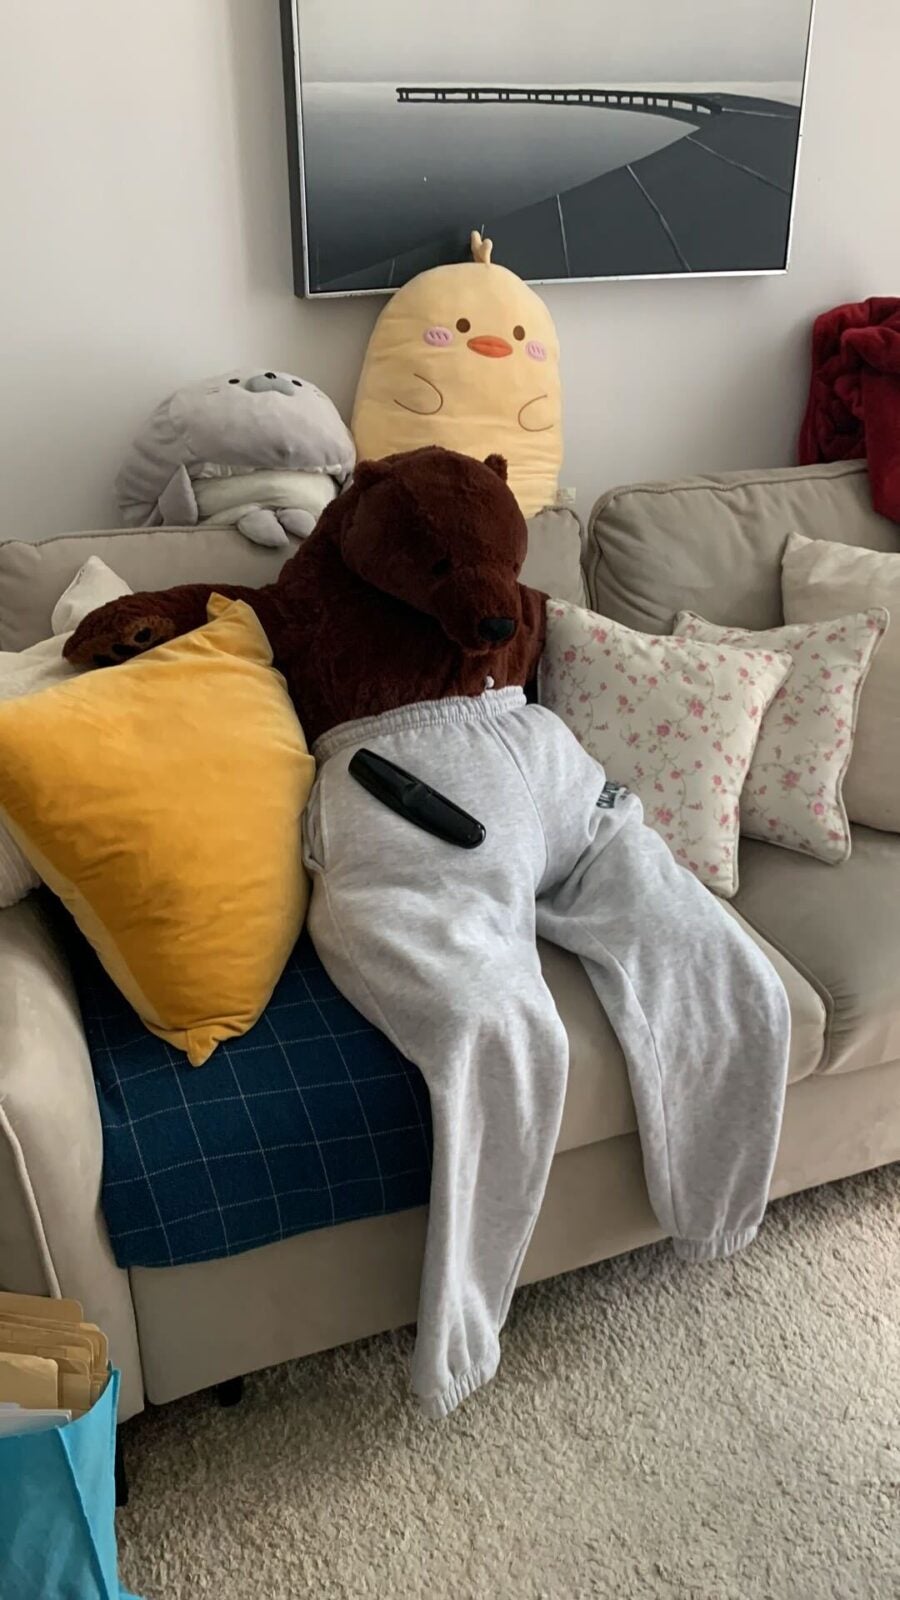 Ikea's Djungelskog bear wearing a grey sweatpants, sitting on the sofa with pillows on either side of it. A television remote control sits on its lap.